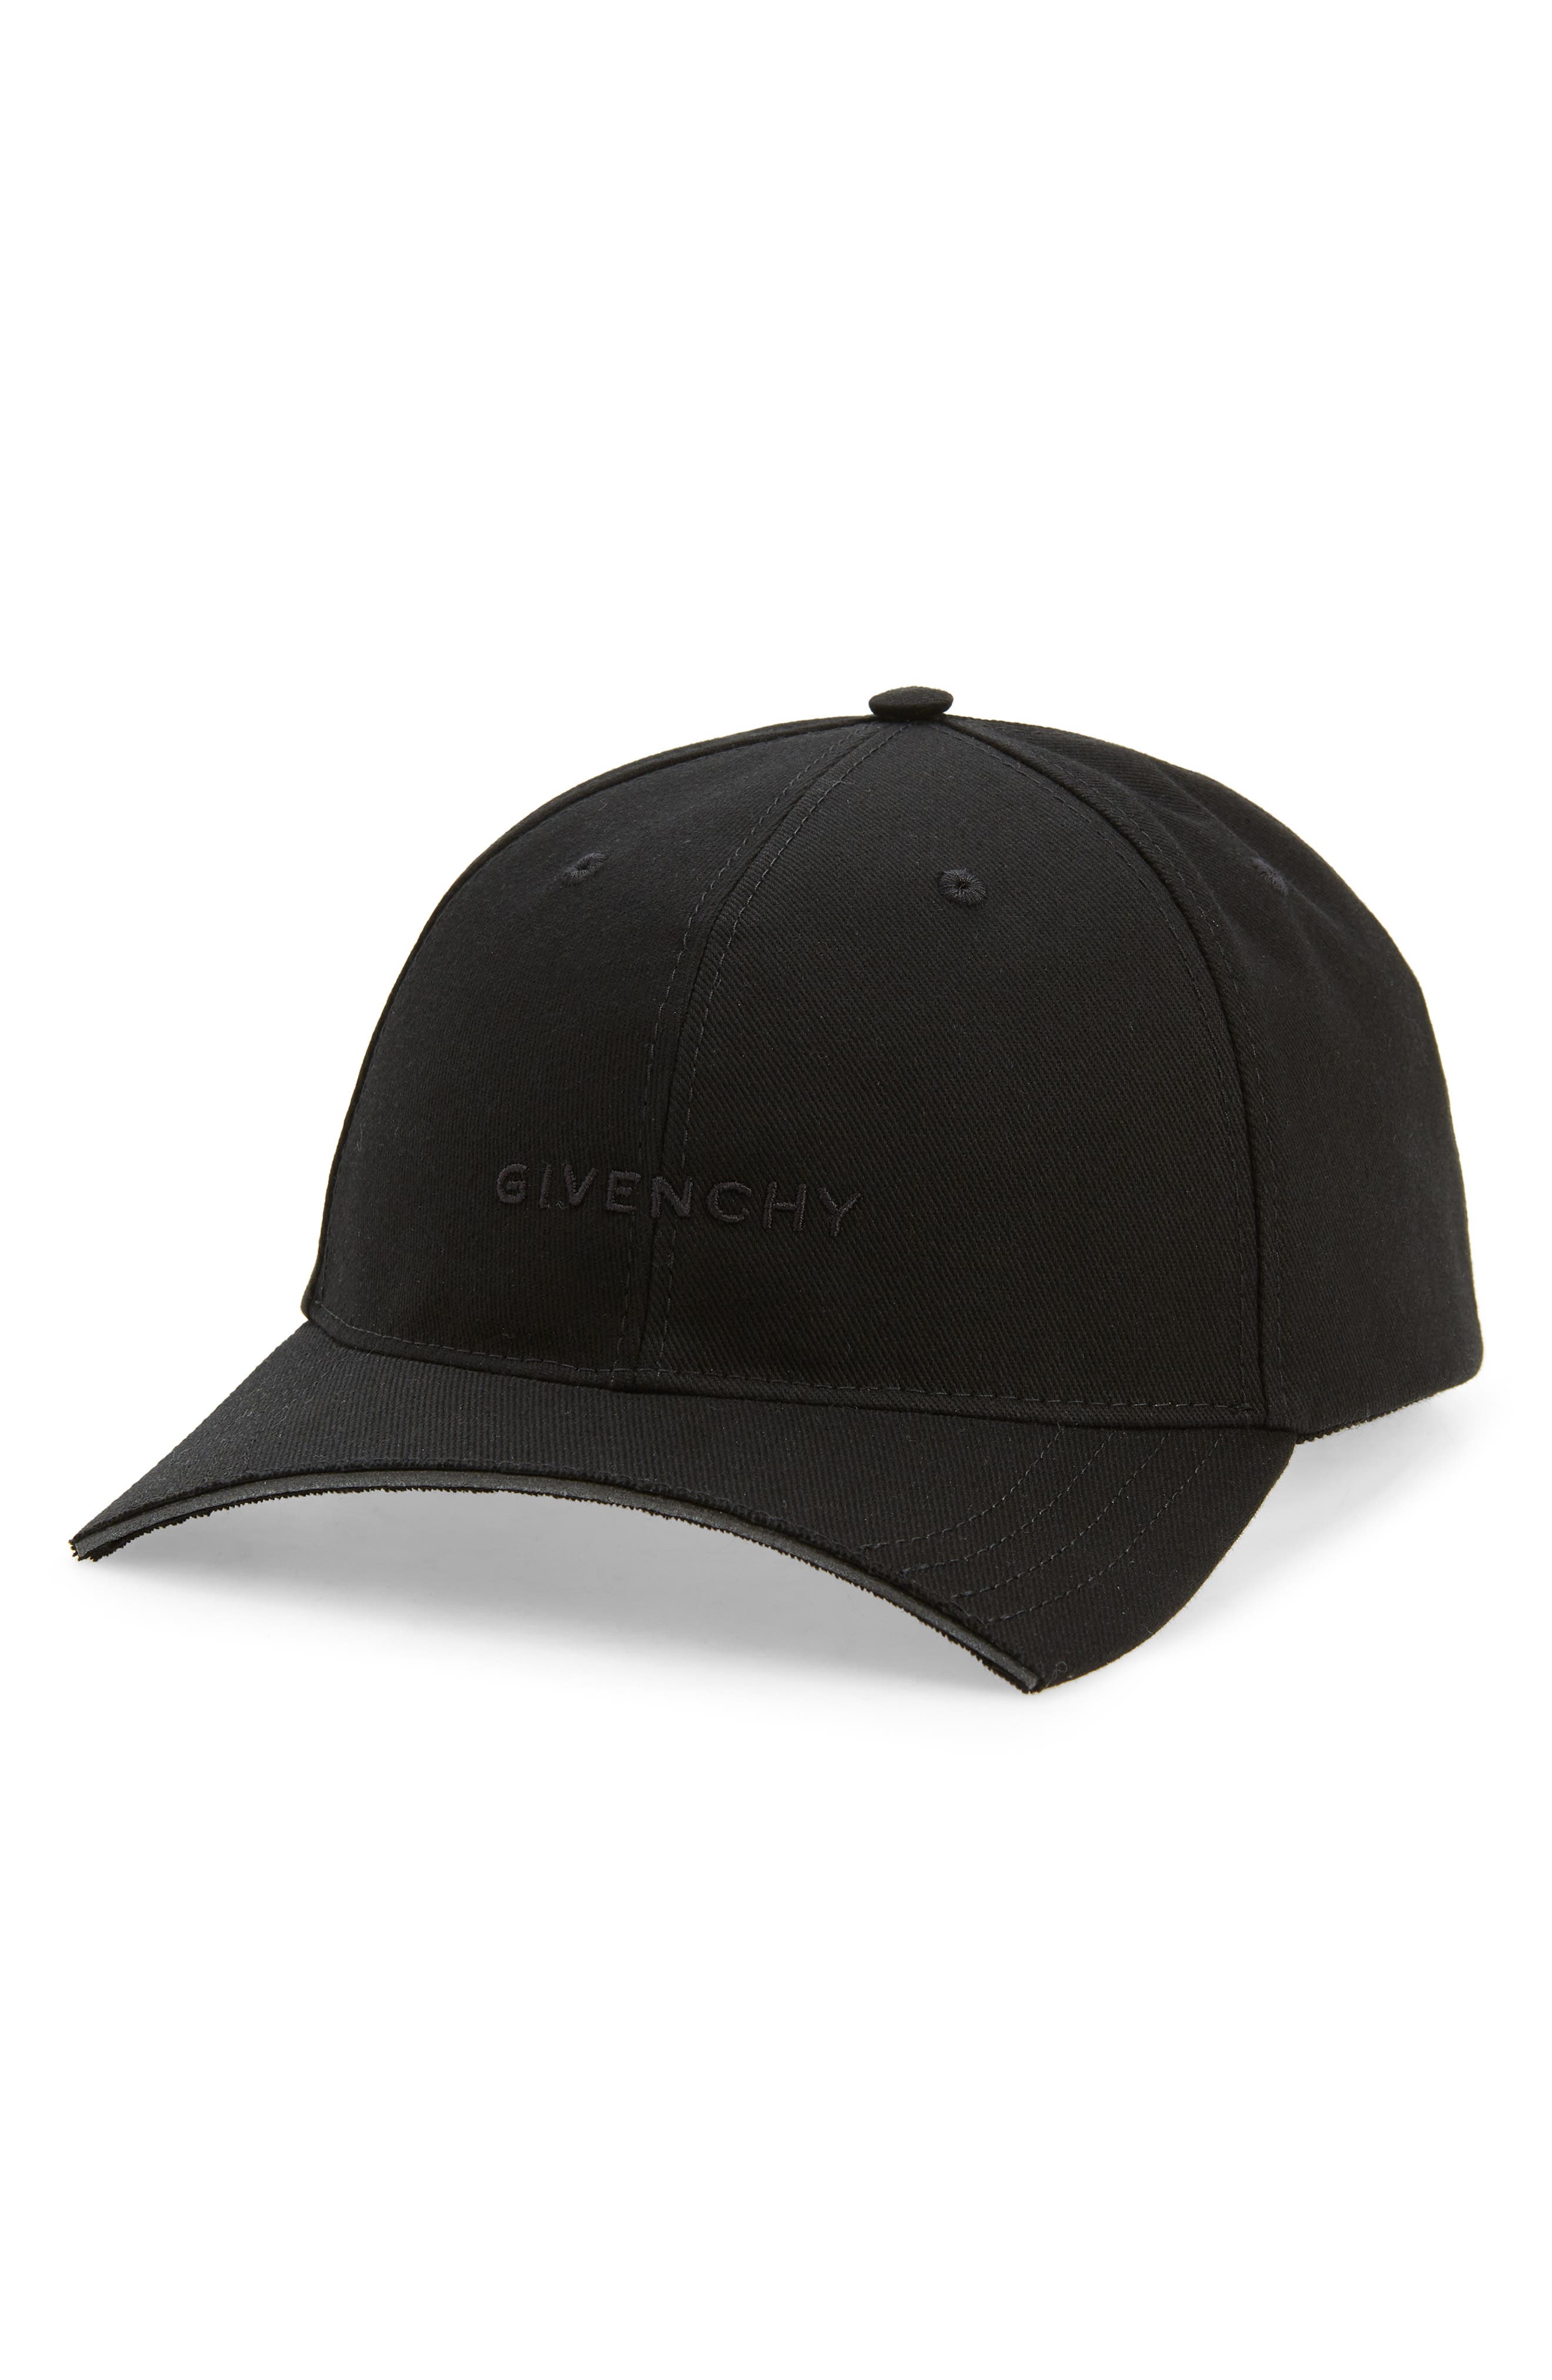 for Men Givenchy Cotton Twill Baseball Hat in White Black Mens Hats Givenchy Hats 